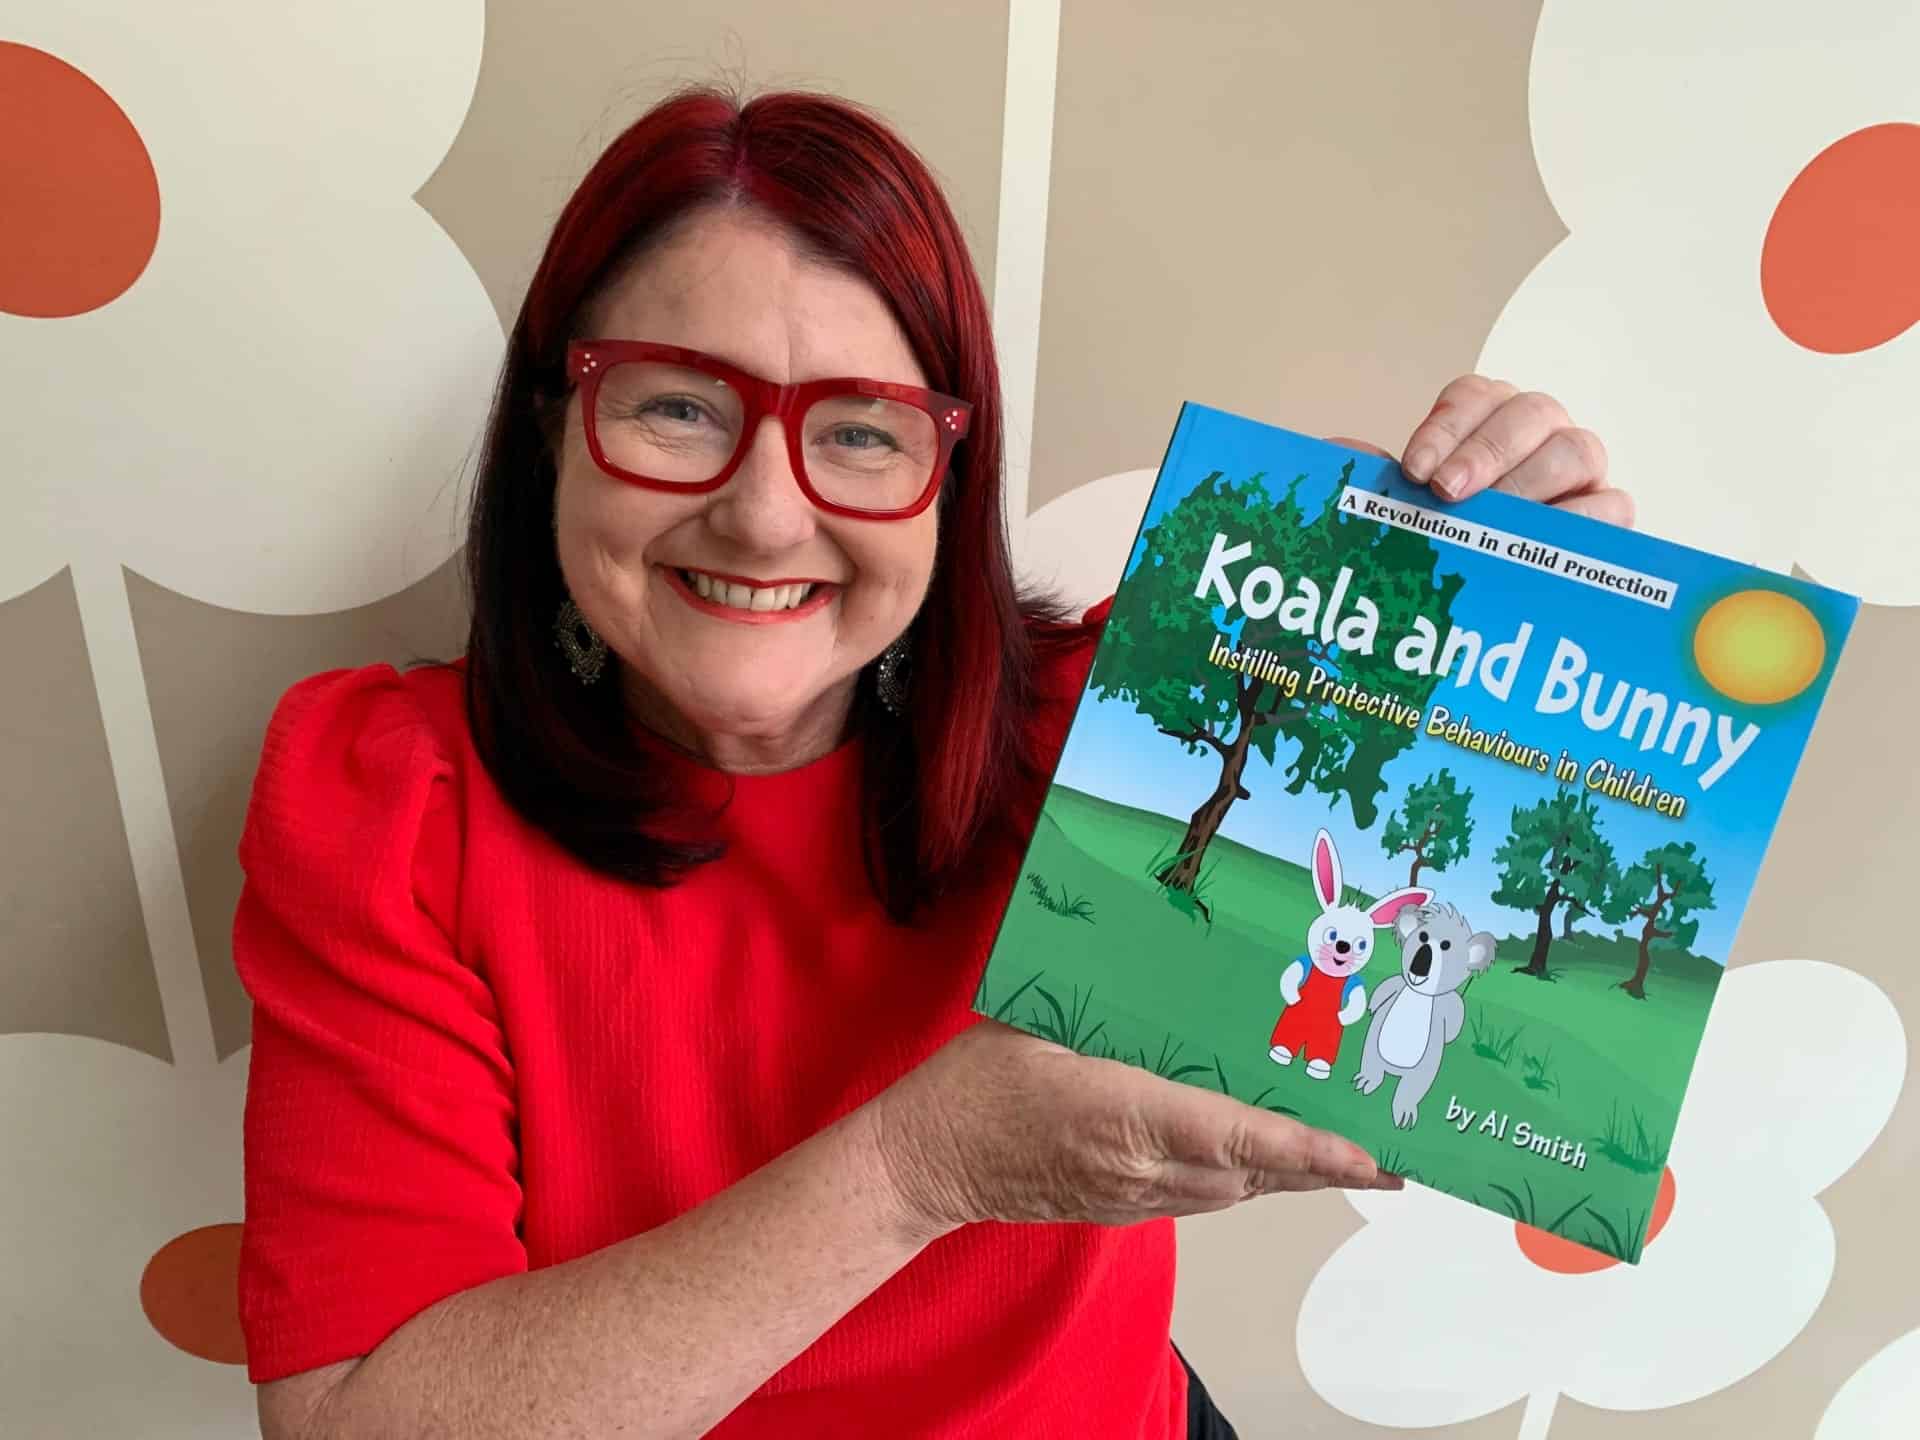 Koala and Bunny: Instilling Protective Behaviours in Children - Book review by Rowena Thomas | 'Amazing Me'